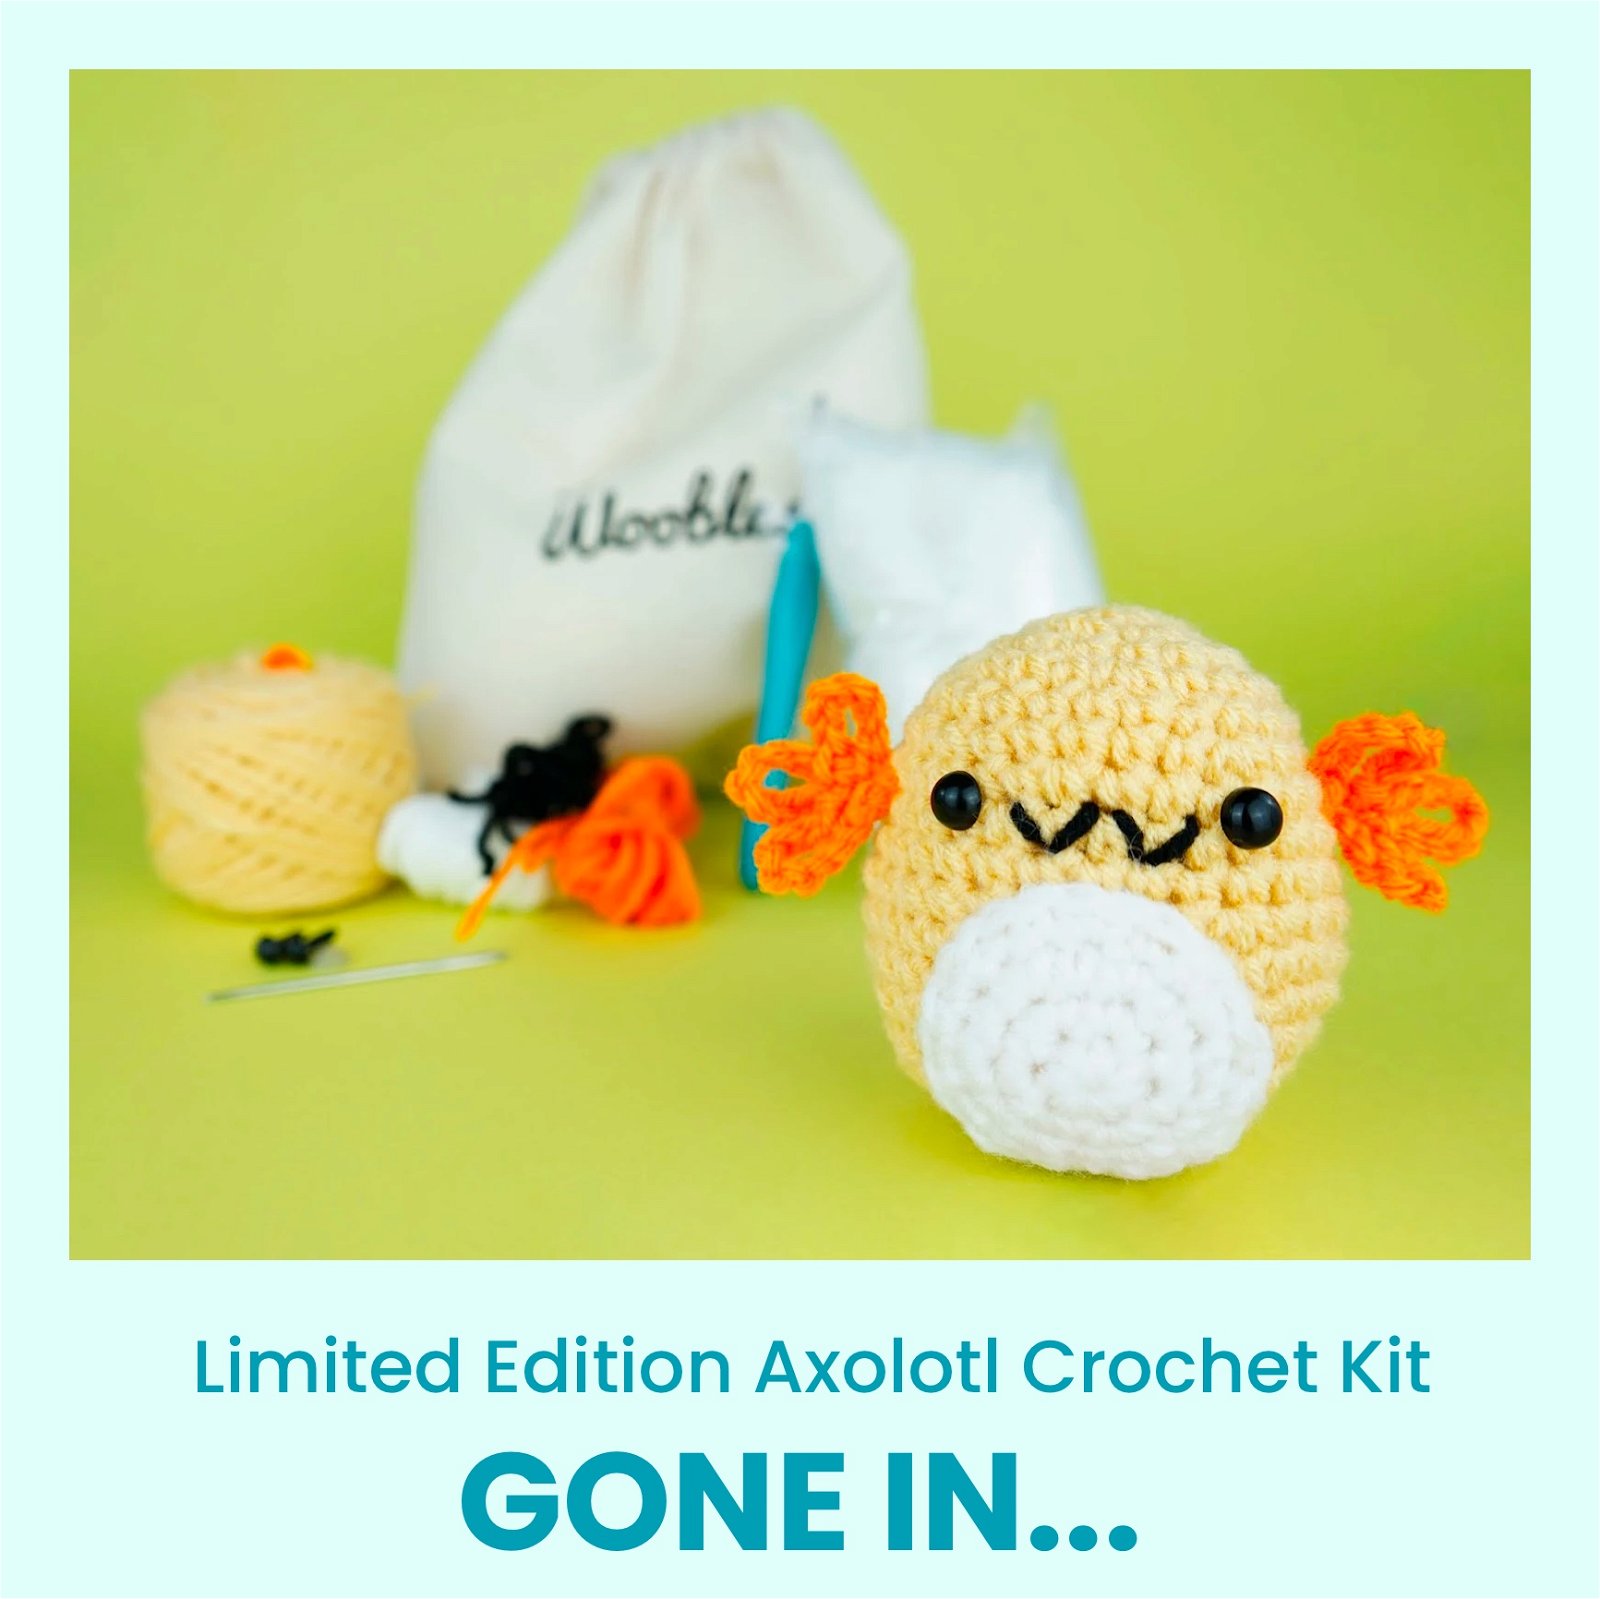 The Woobles: 24 HOURS LEFT before the Limited Edition Axolotl Kit